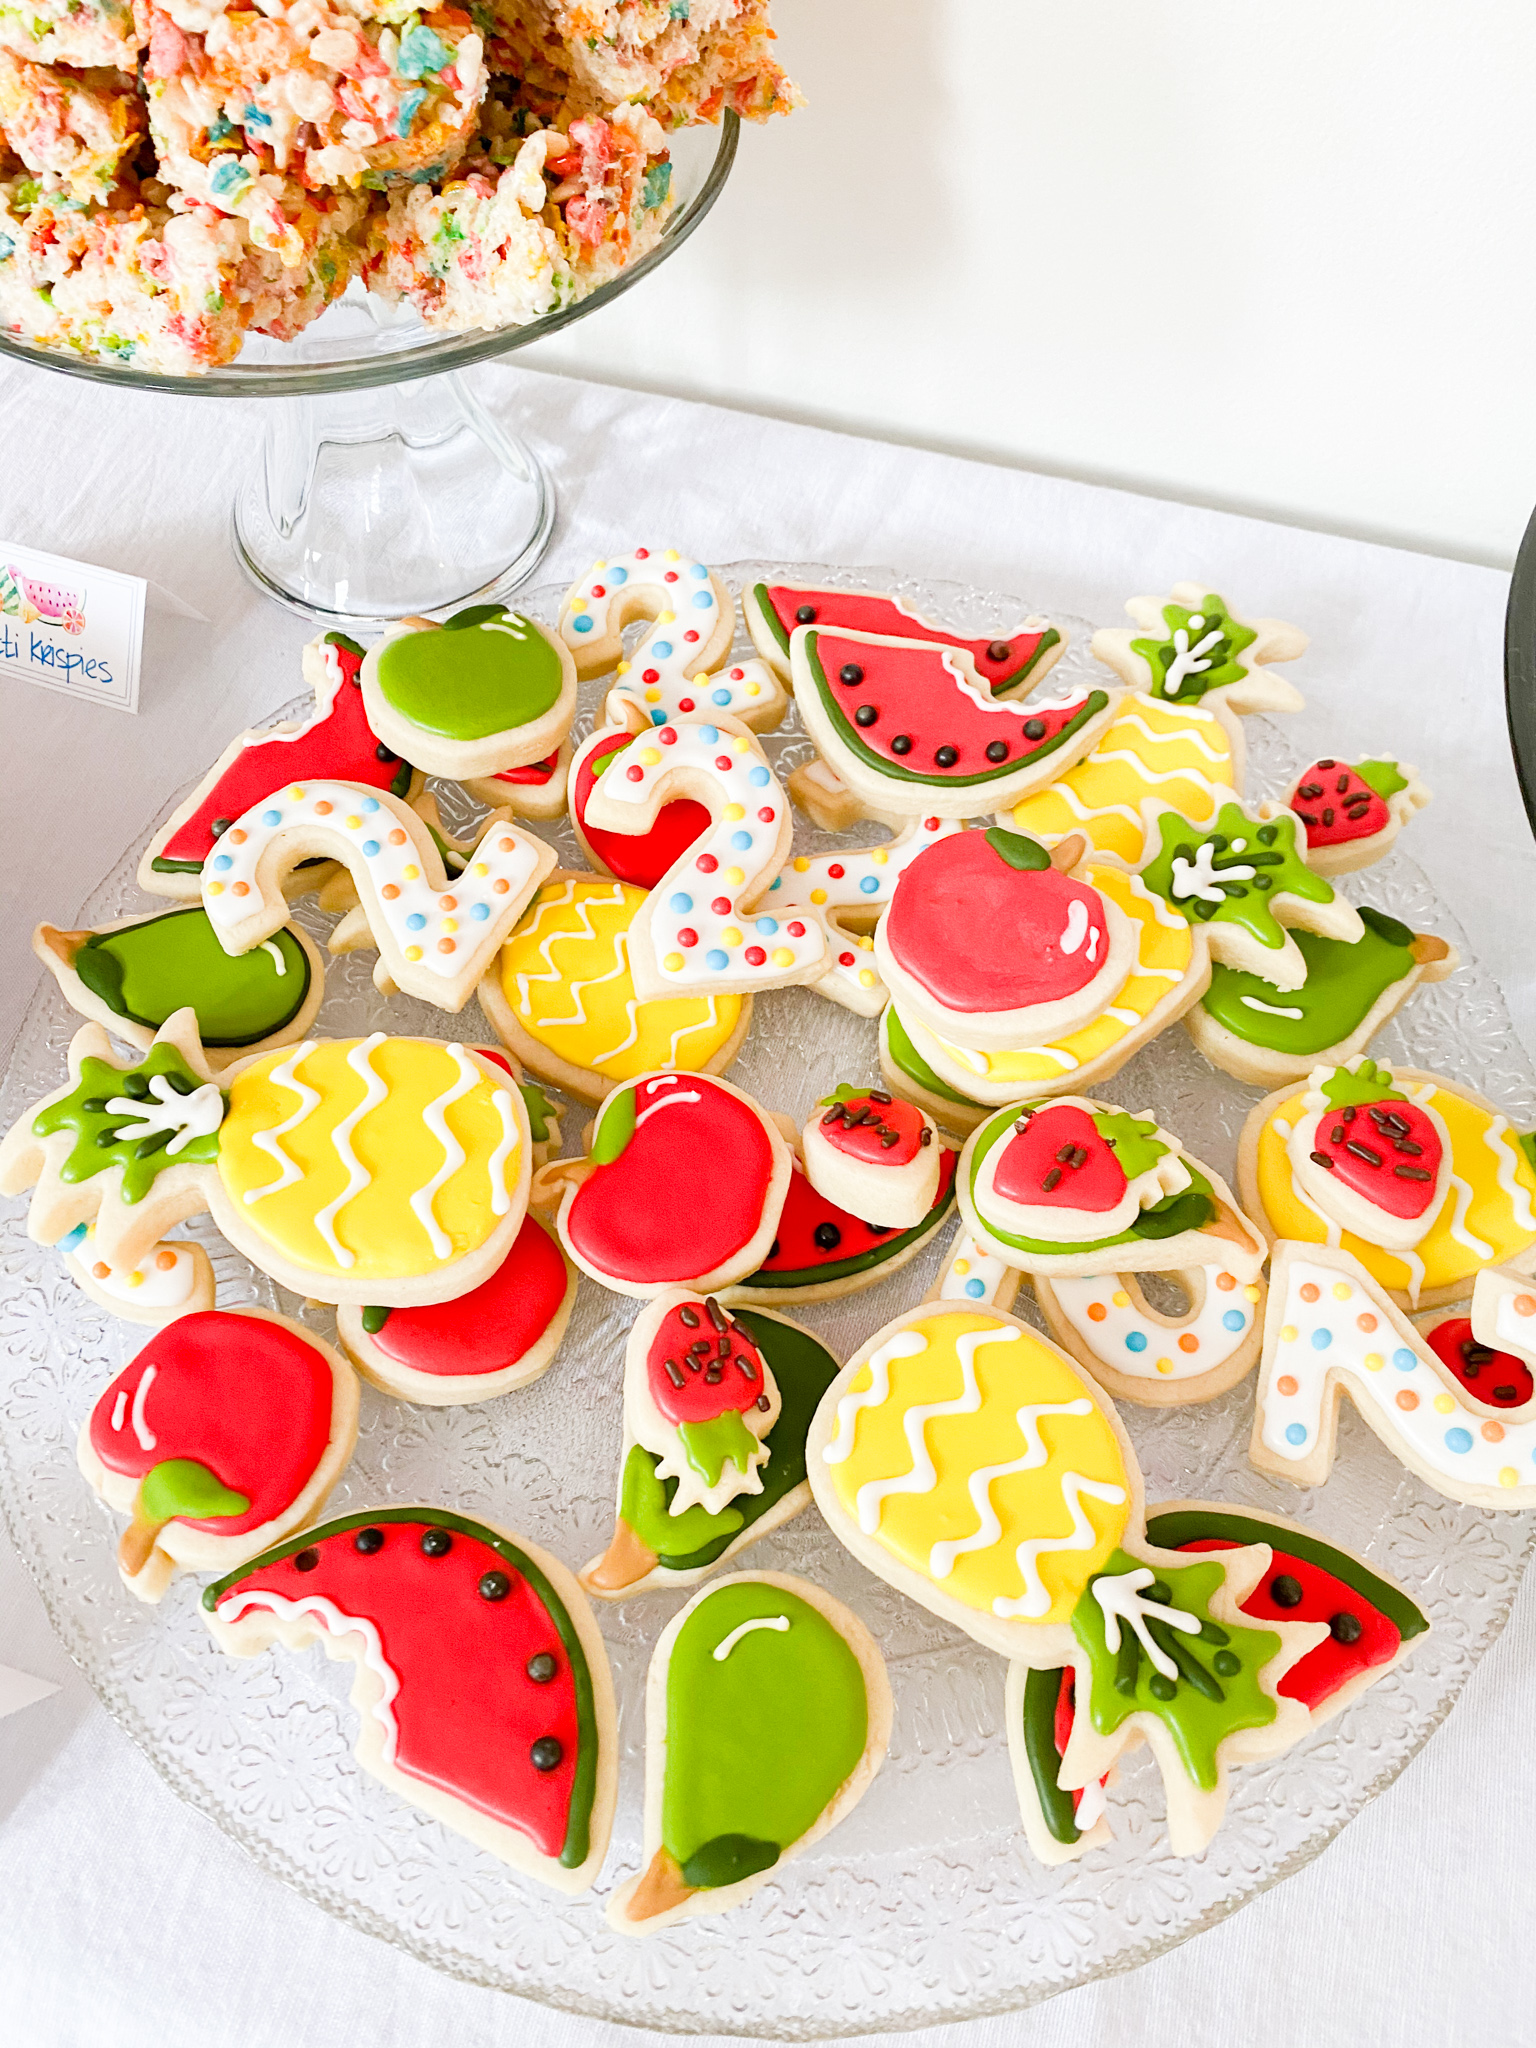 2nd Birthday Party Ideas by popular Ohio lifestyle blog, Coffee Beans and Bobby Pins: image of a dessert table containing rainbow colored Rice Krispy treats and sugar cookies decorated to look like apples, watermelon slices, strawberries, pineapple, and the number 2.  